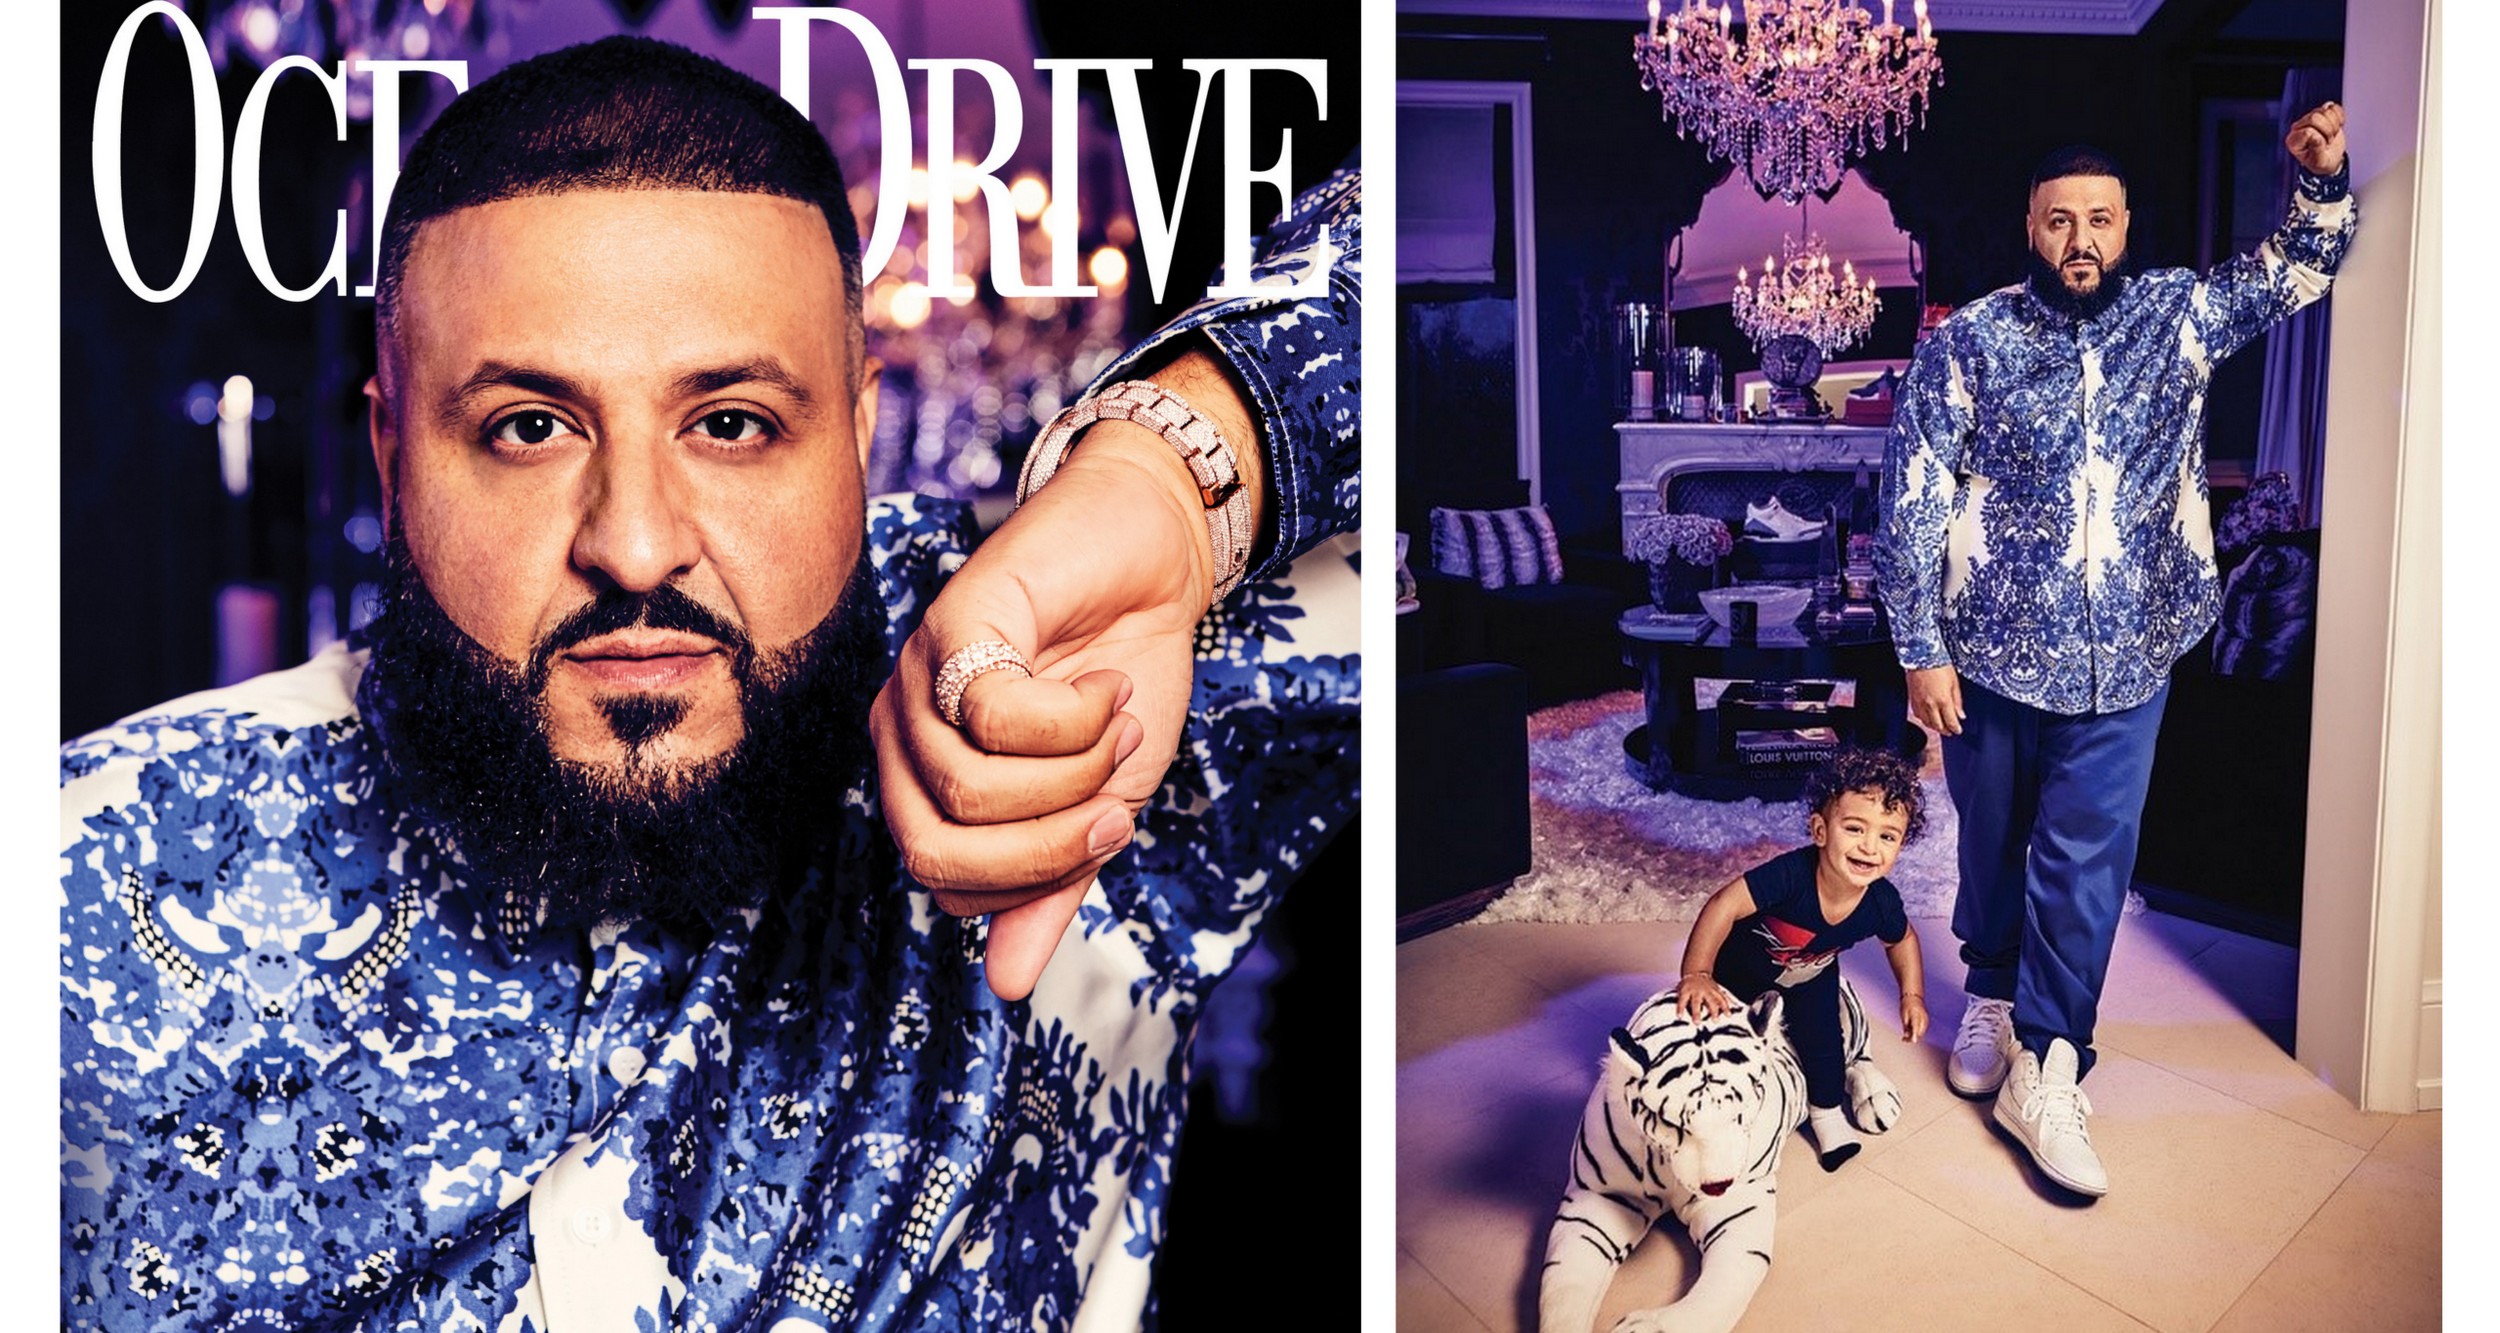 DJ Khaled on the cover of Ocean Drive magazine’s April Issue